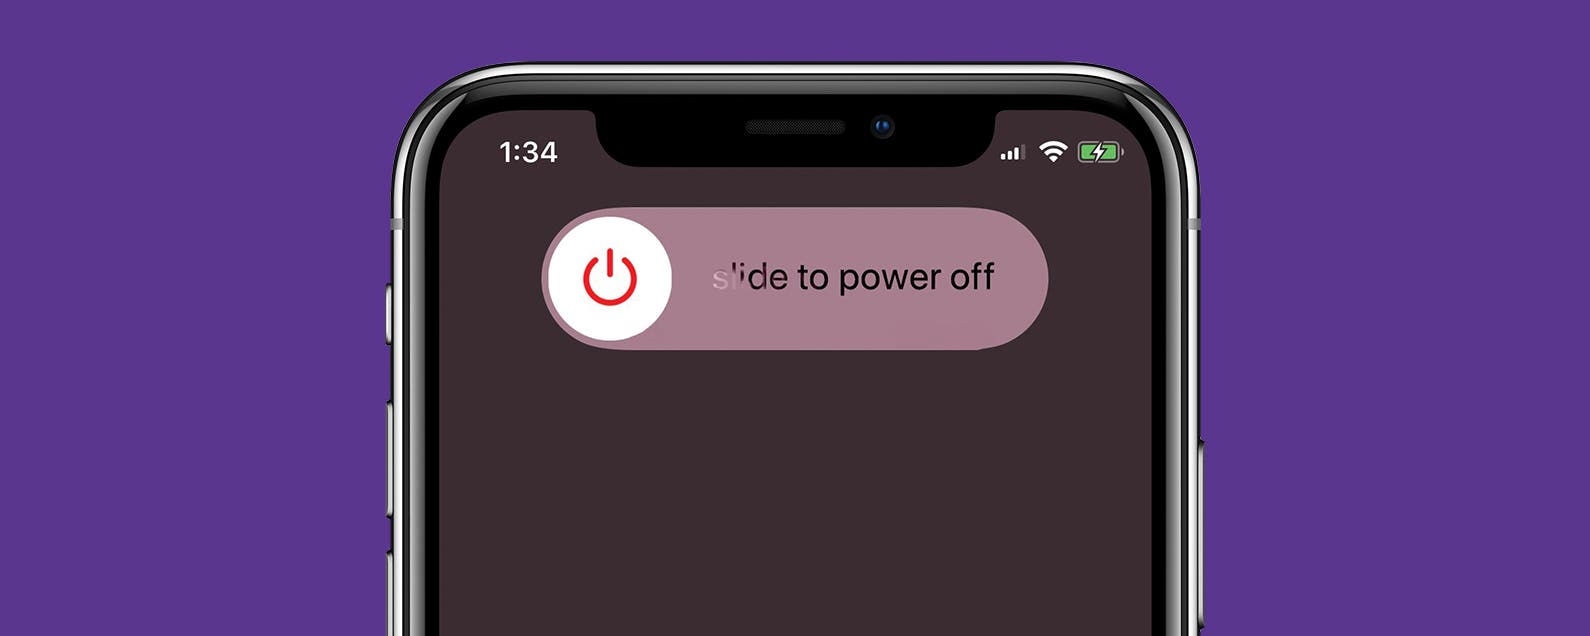 How to Turn On iPhone X & Turn Off iPhone X